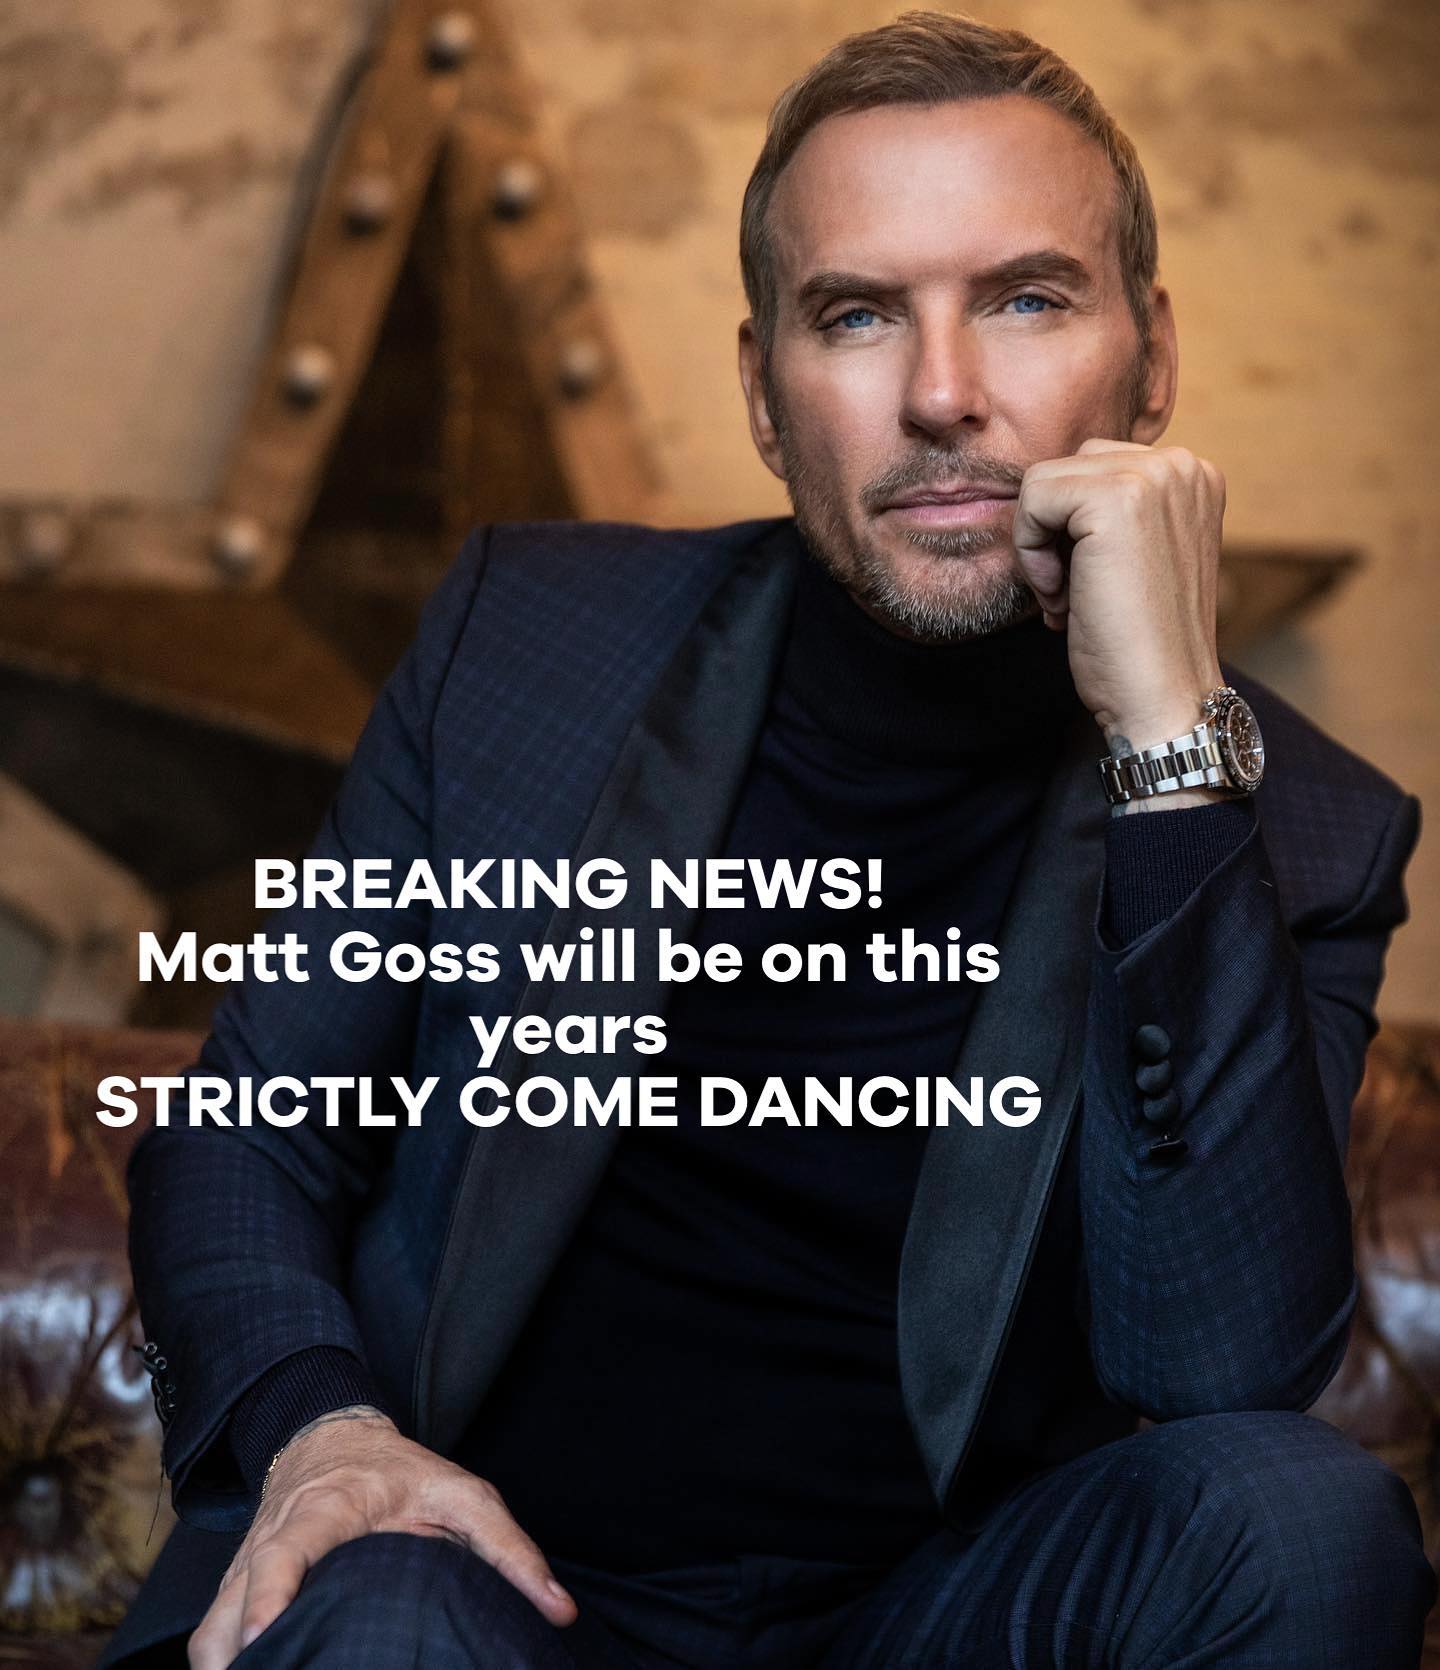 Matt Goss has signed up for this years BBC Strictly Come Dancing

#mattgoss #bbcstrictlycomedancing #bbcstrictly